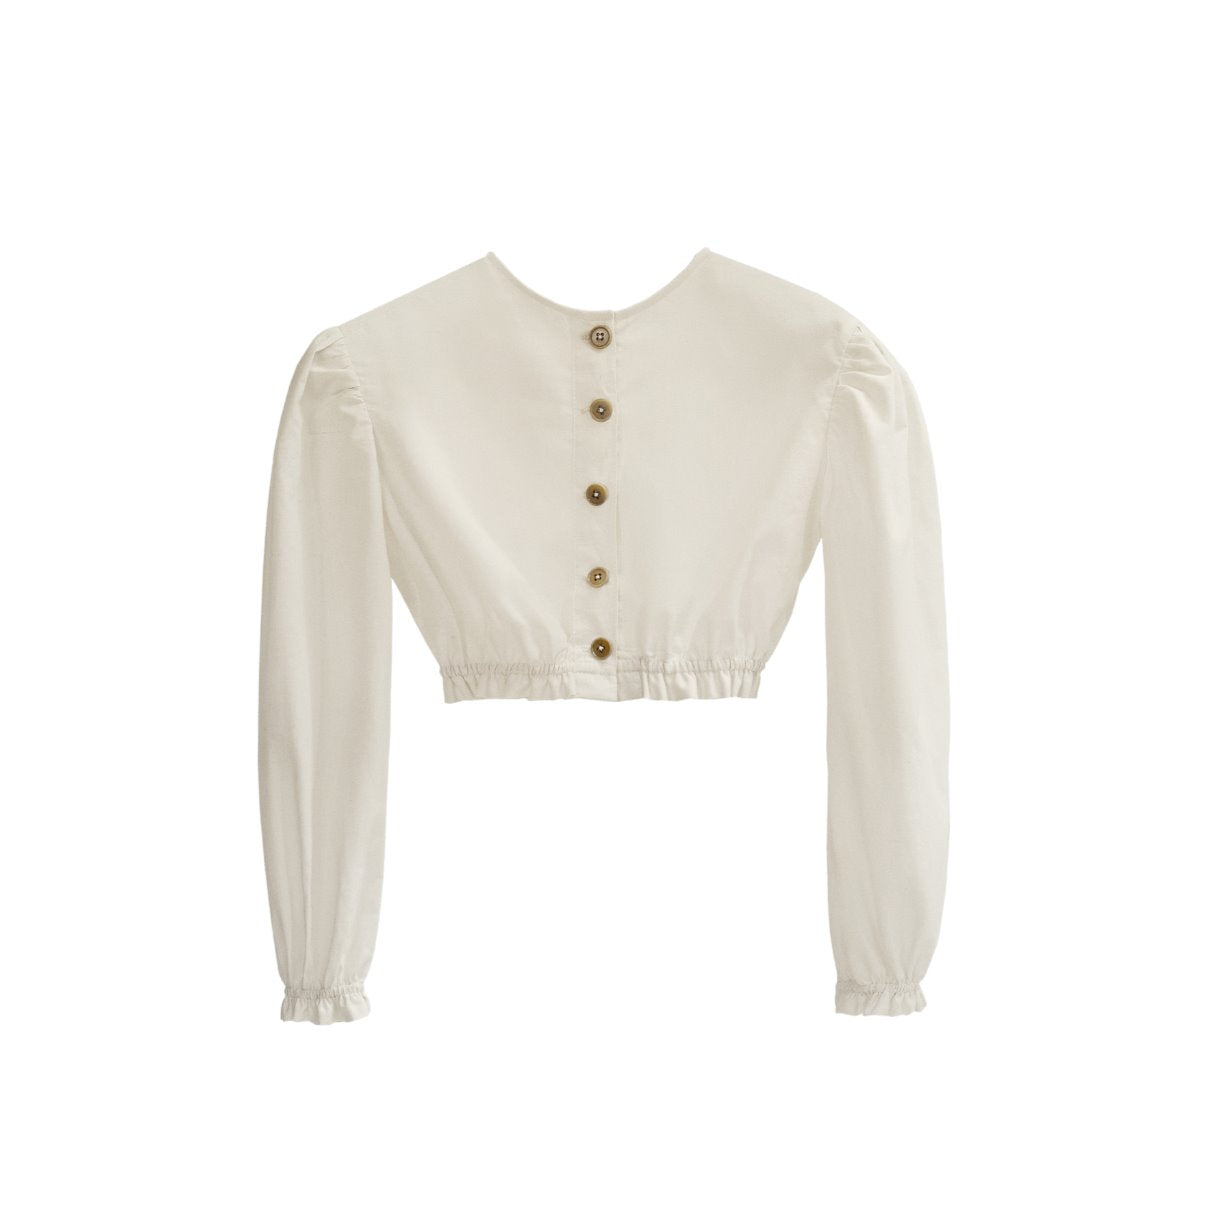 The Ginger Top - White Poplin Tops Five of us 